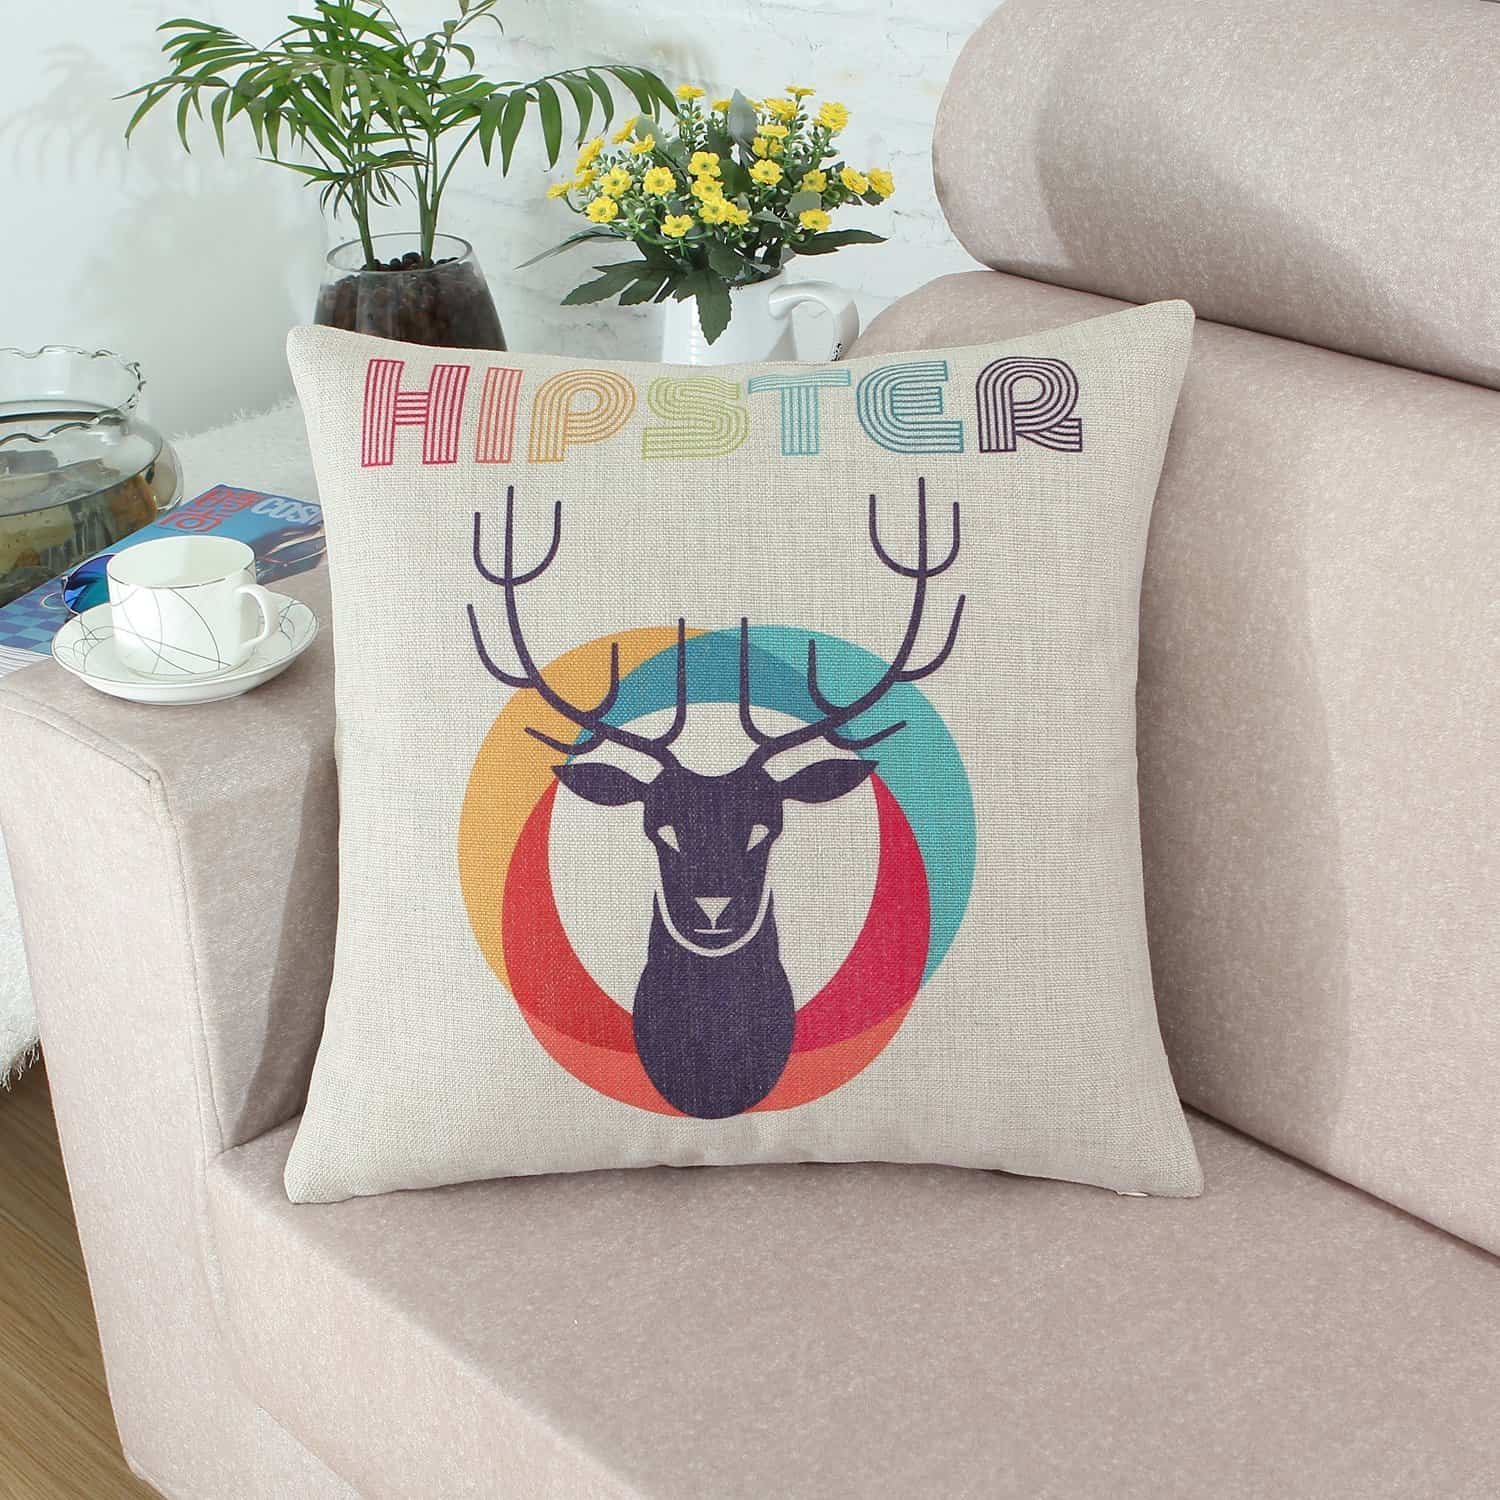 Euphoria Hipster Retro Style Deer Head Pillow Covers Cool Stuff to Buy